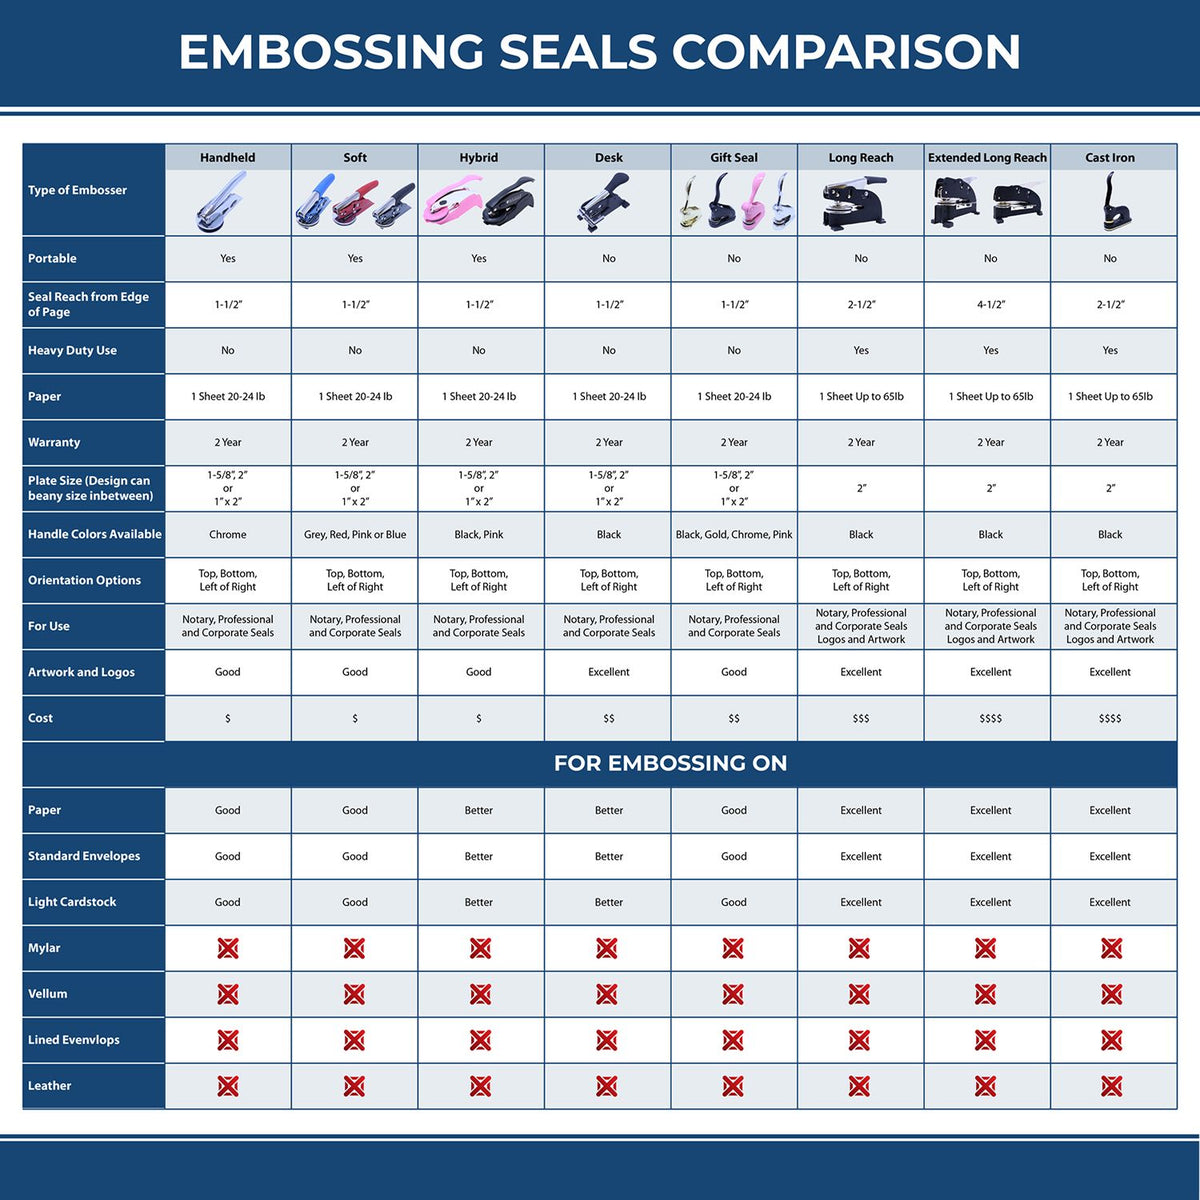 A comparison chart for the different types of mount models available for the State of District of Columbia Extended Long Reach Engineer Seal.